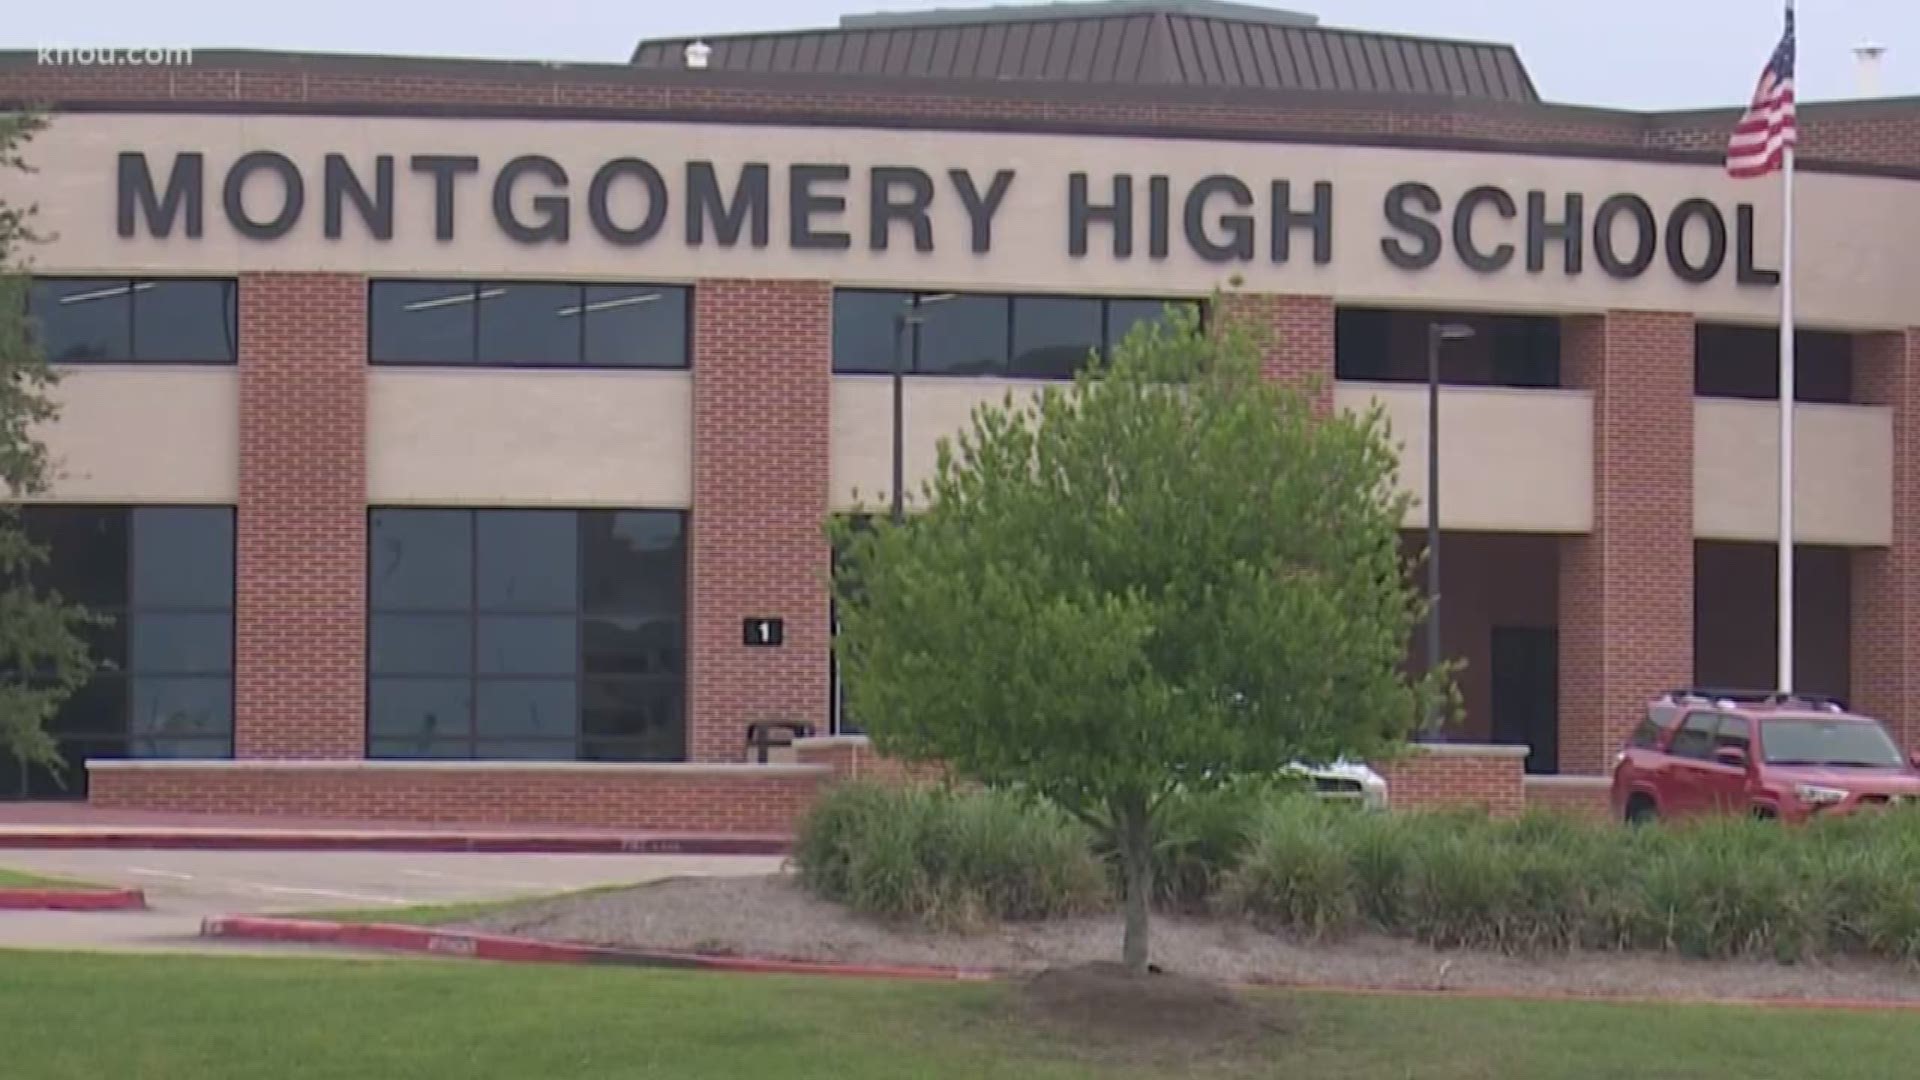 Parents are concerned and looking for answers after news started to spread about a brutal hazing incident involving the Montgomery High School football team.